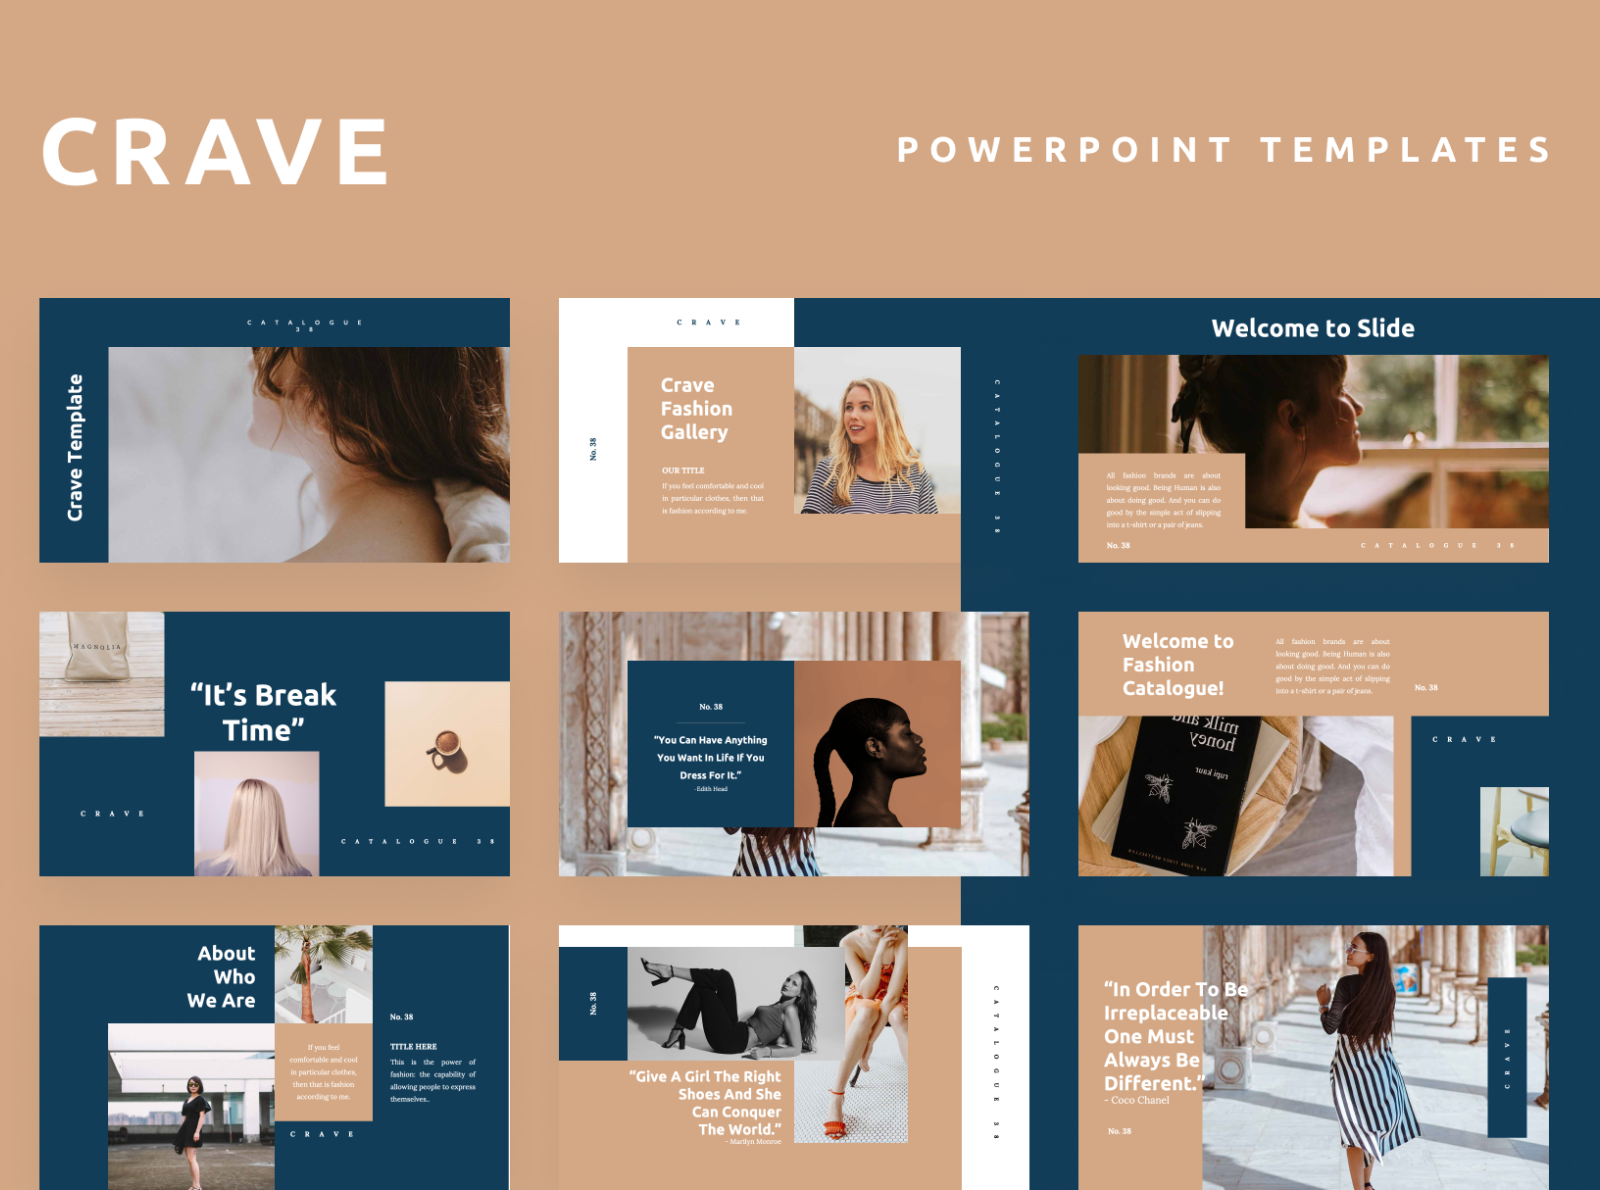 New Powerpoint Templates